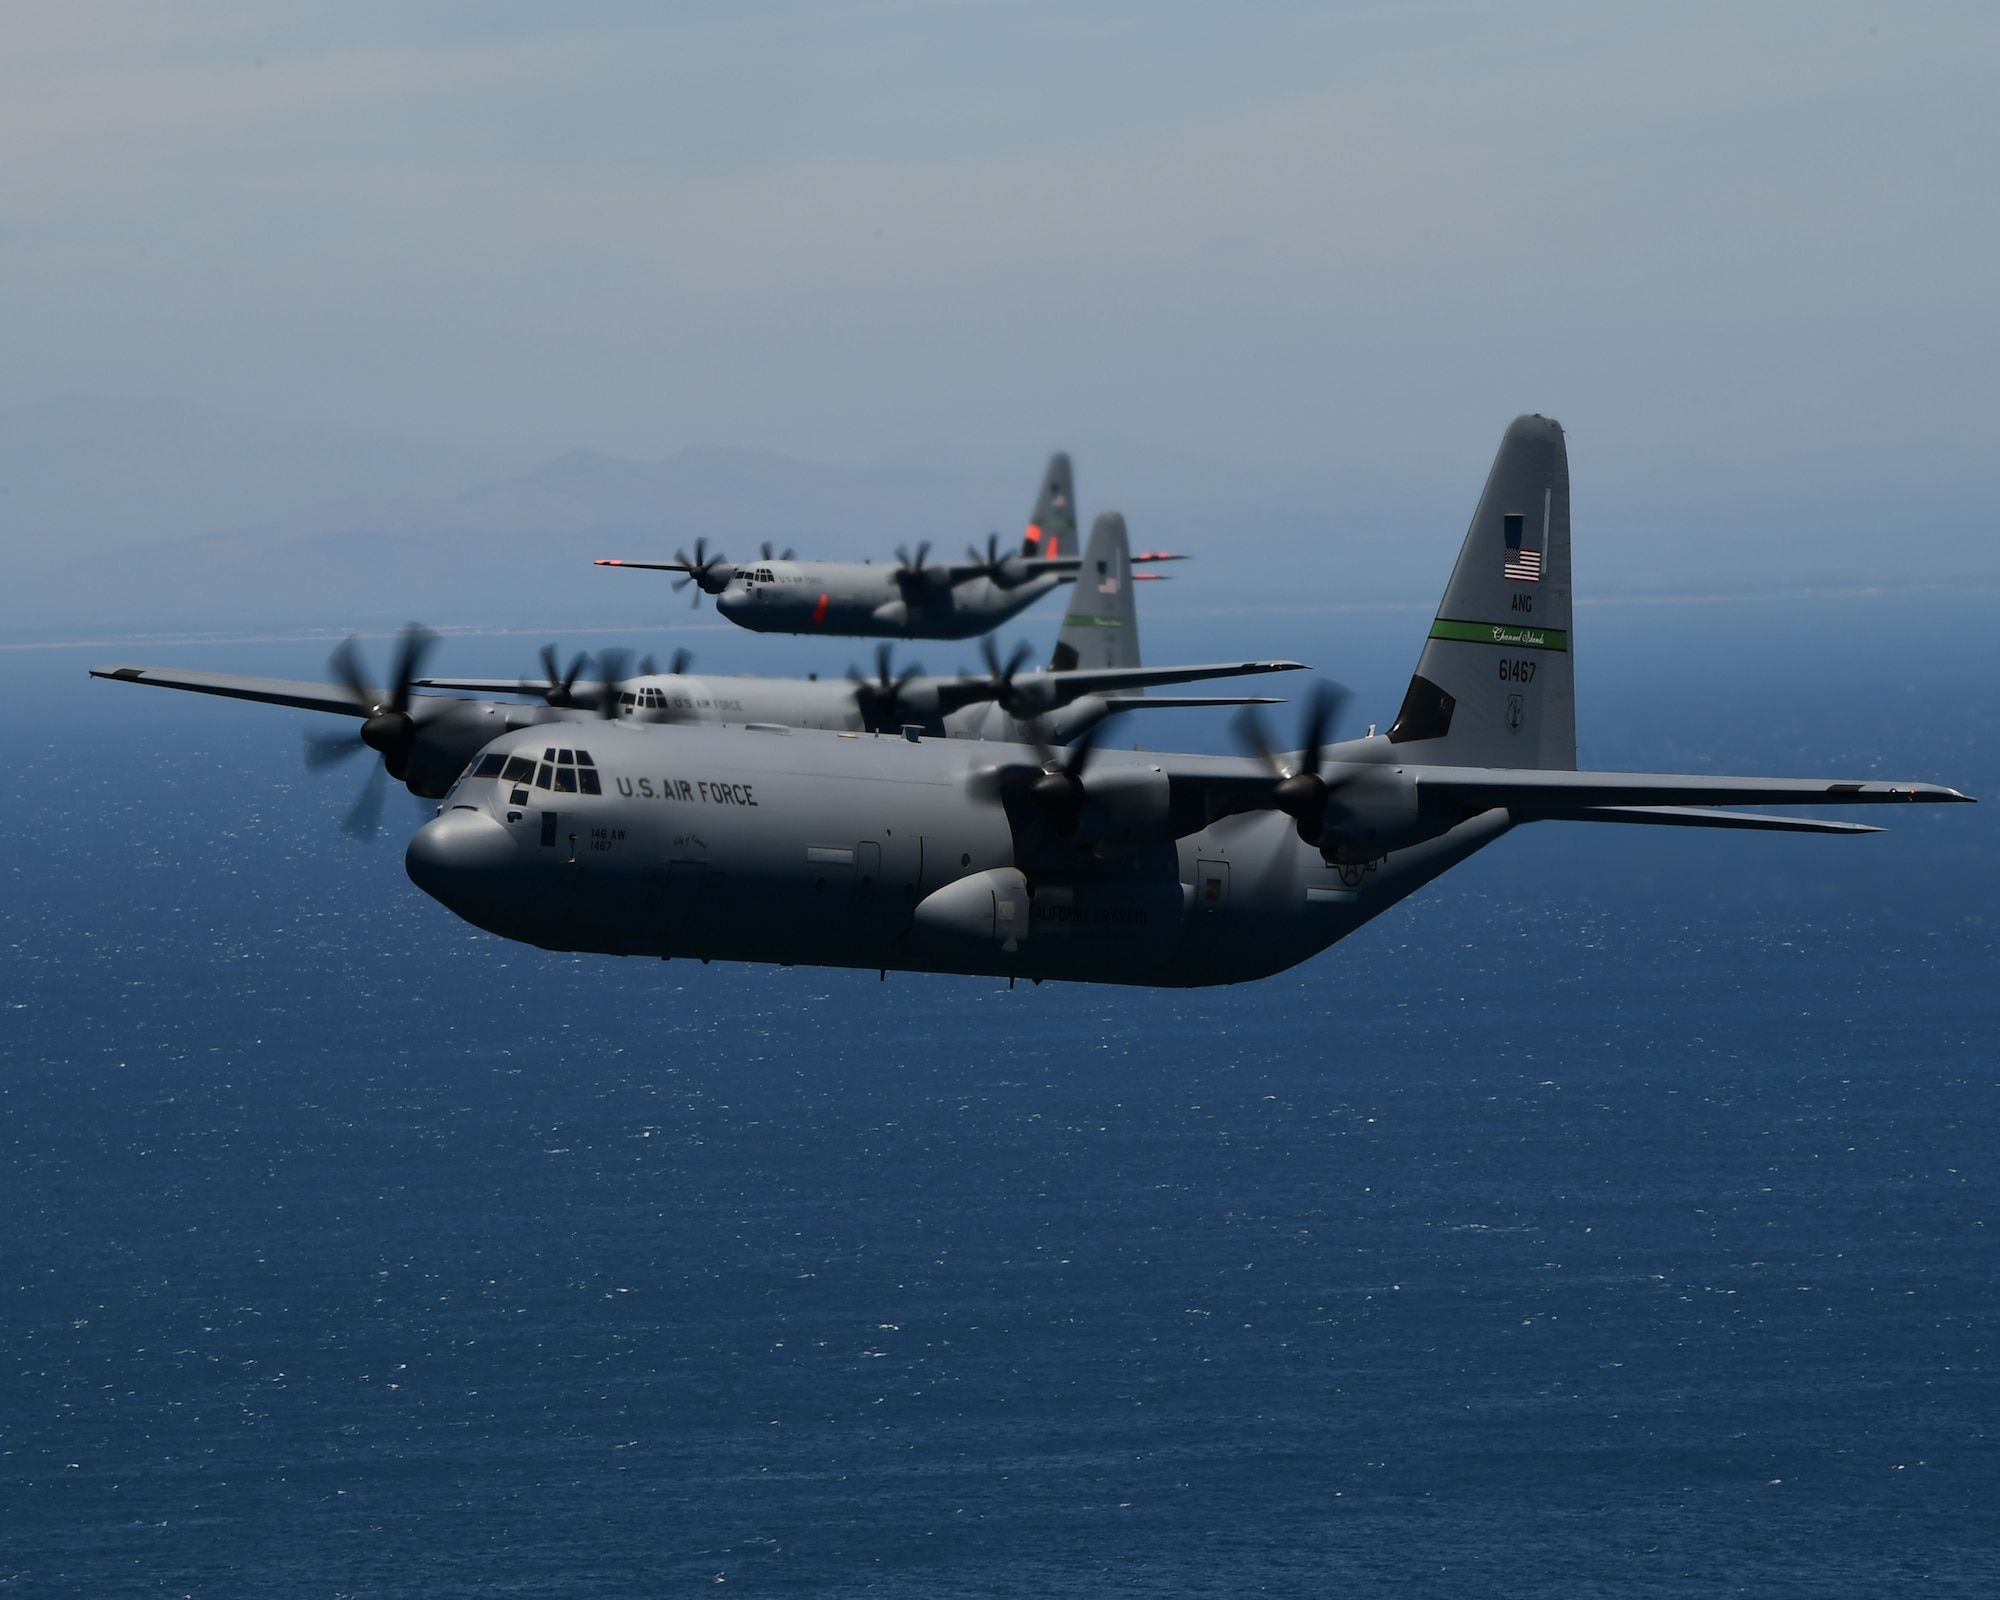 Three military California Air National Guard C-130J aircraft fly in close formation over the blue Pacific Ocean.